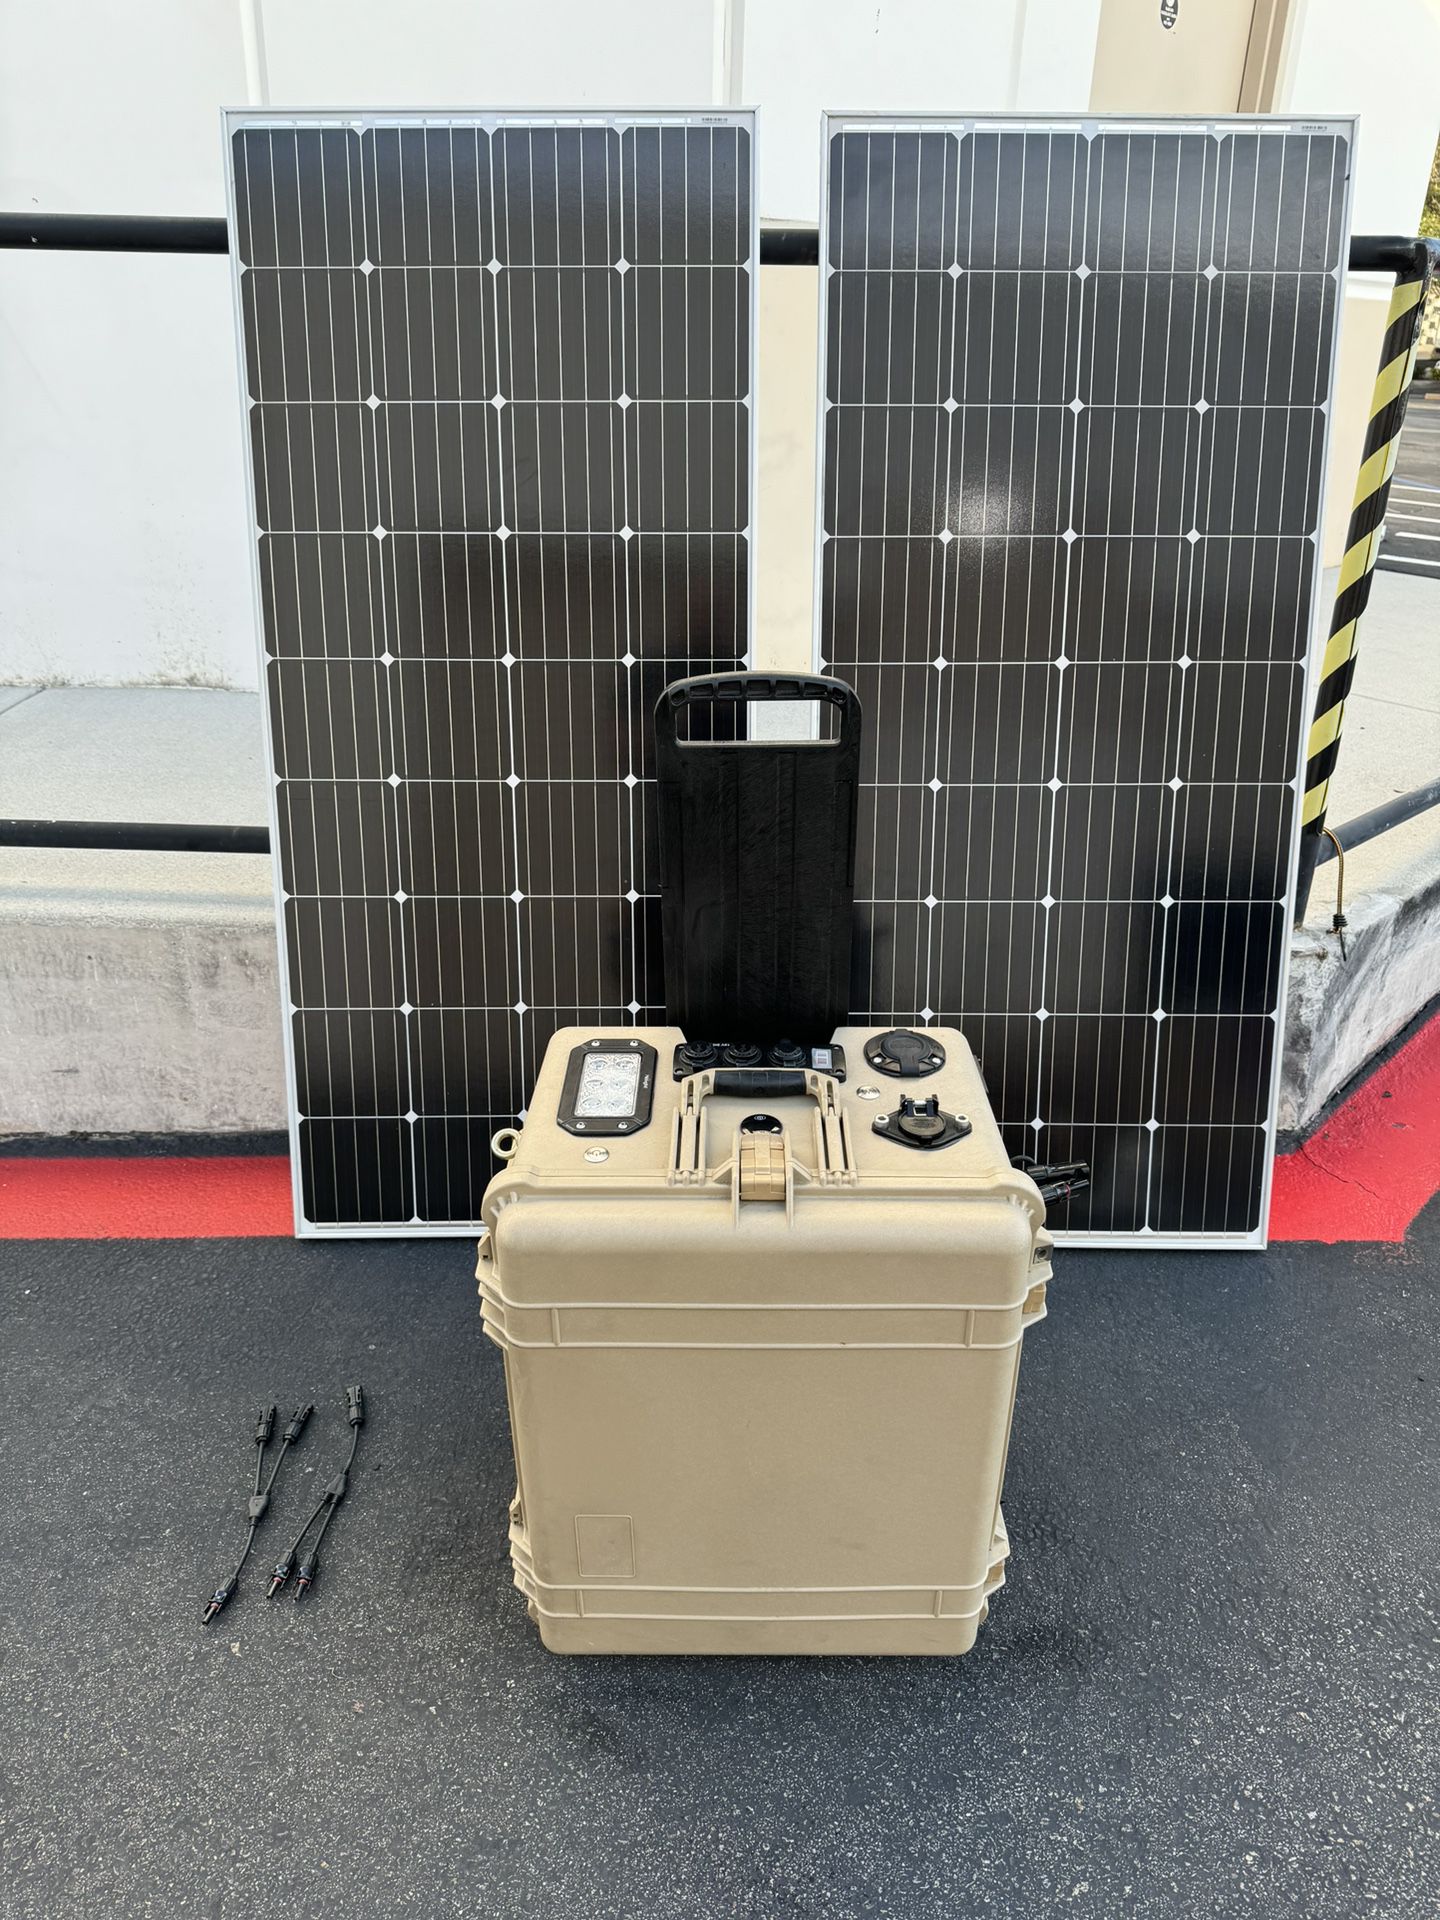 Rugged Heavy Duty Portable Standalone Solar Generator System - Complete - Plug And Play (camper Rv Shed Garage Sprinter Van Bus Camping Off Grid)